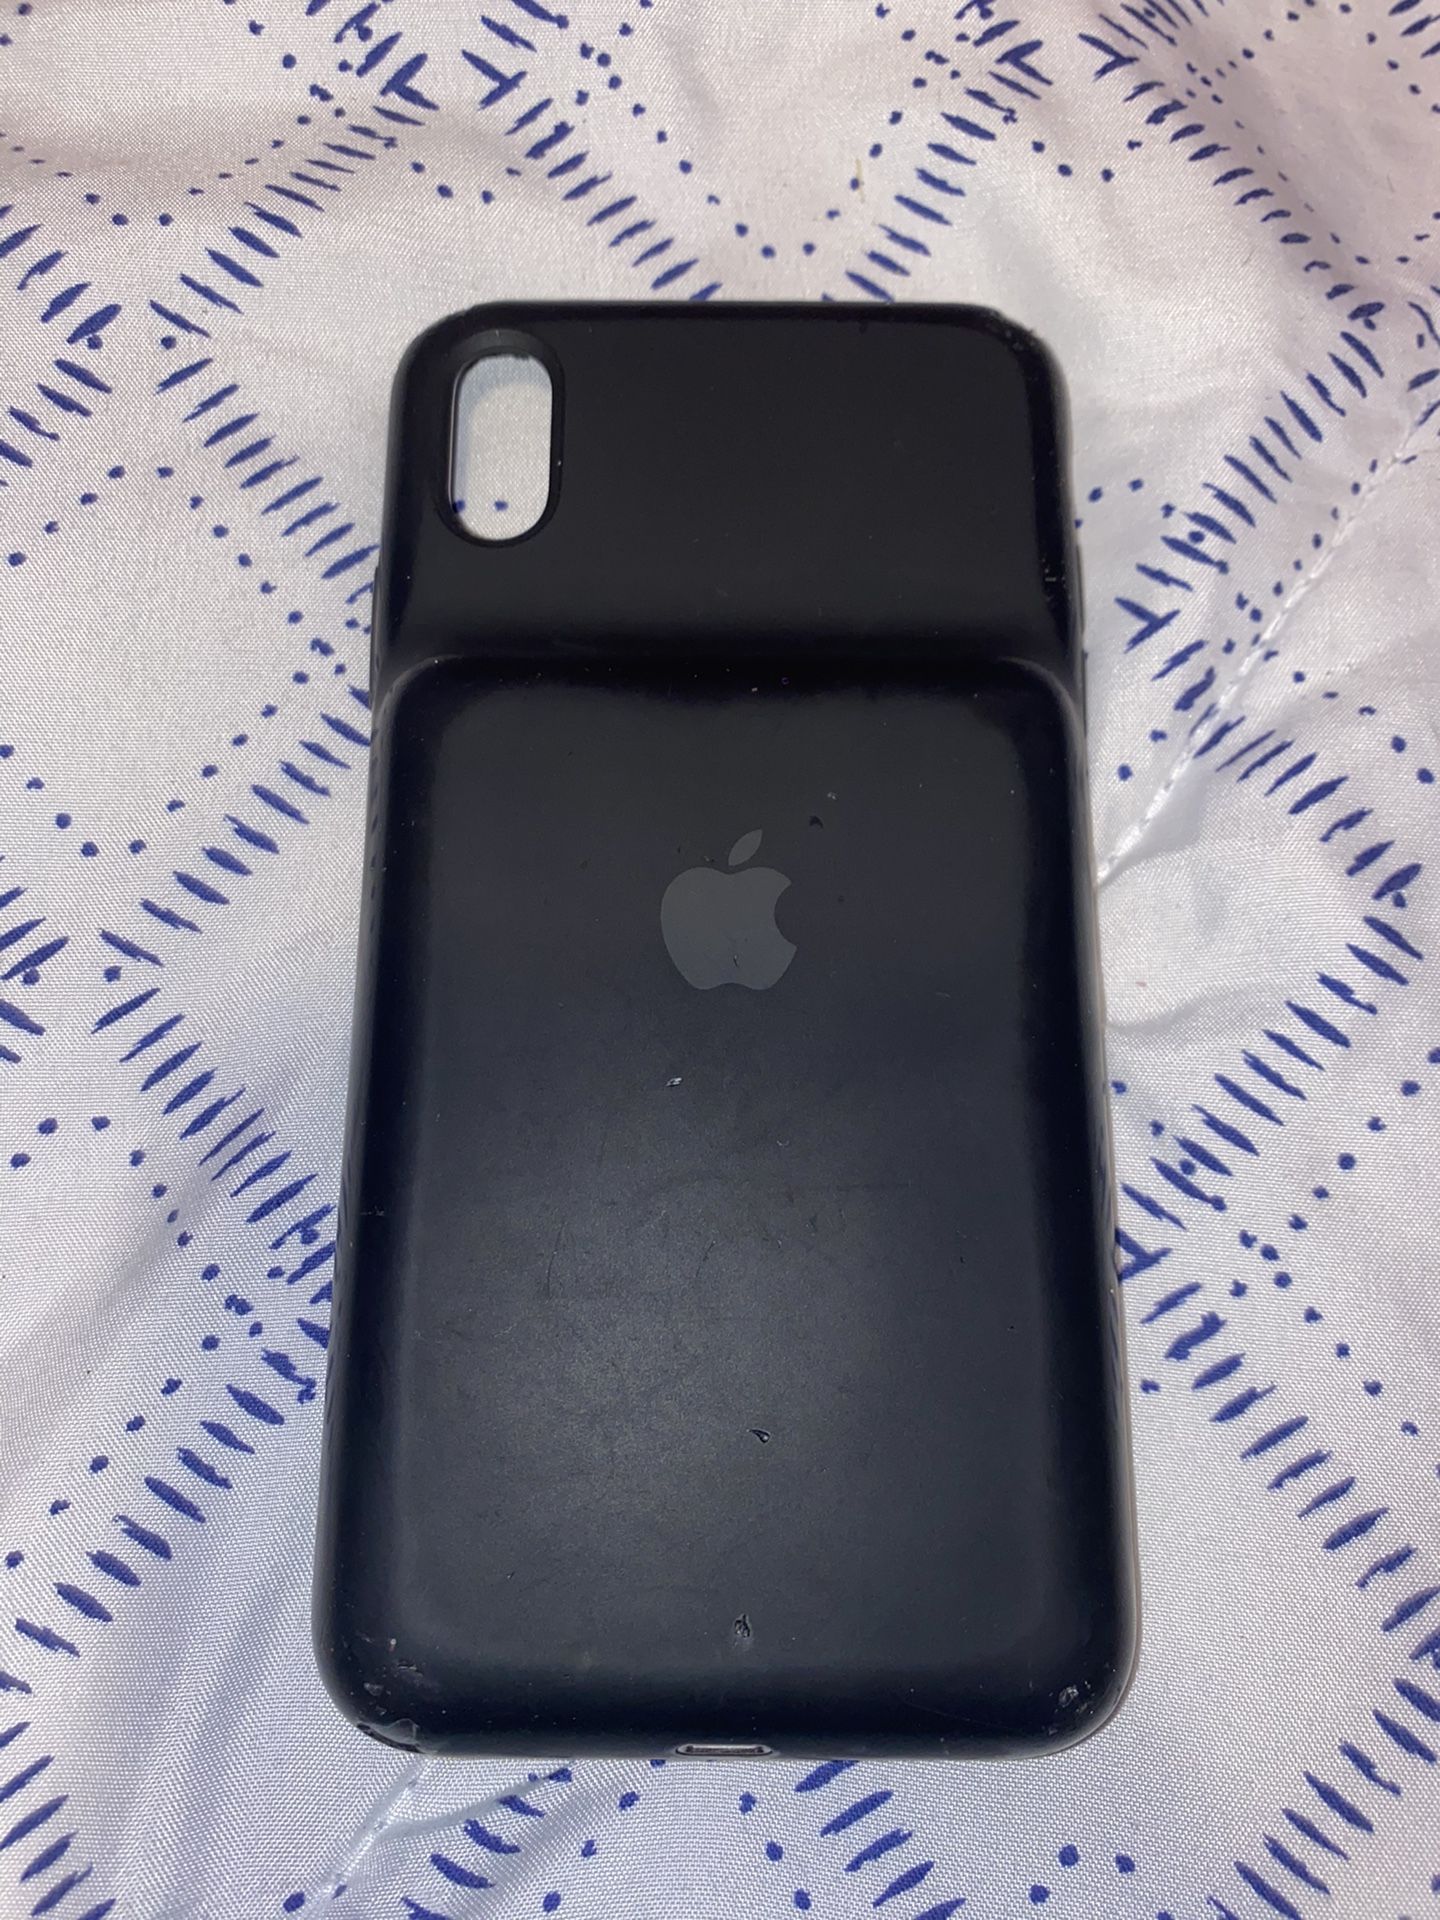 iPhone X max Apple charger case